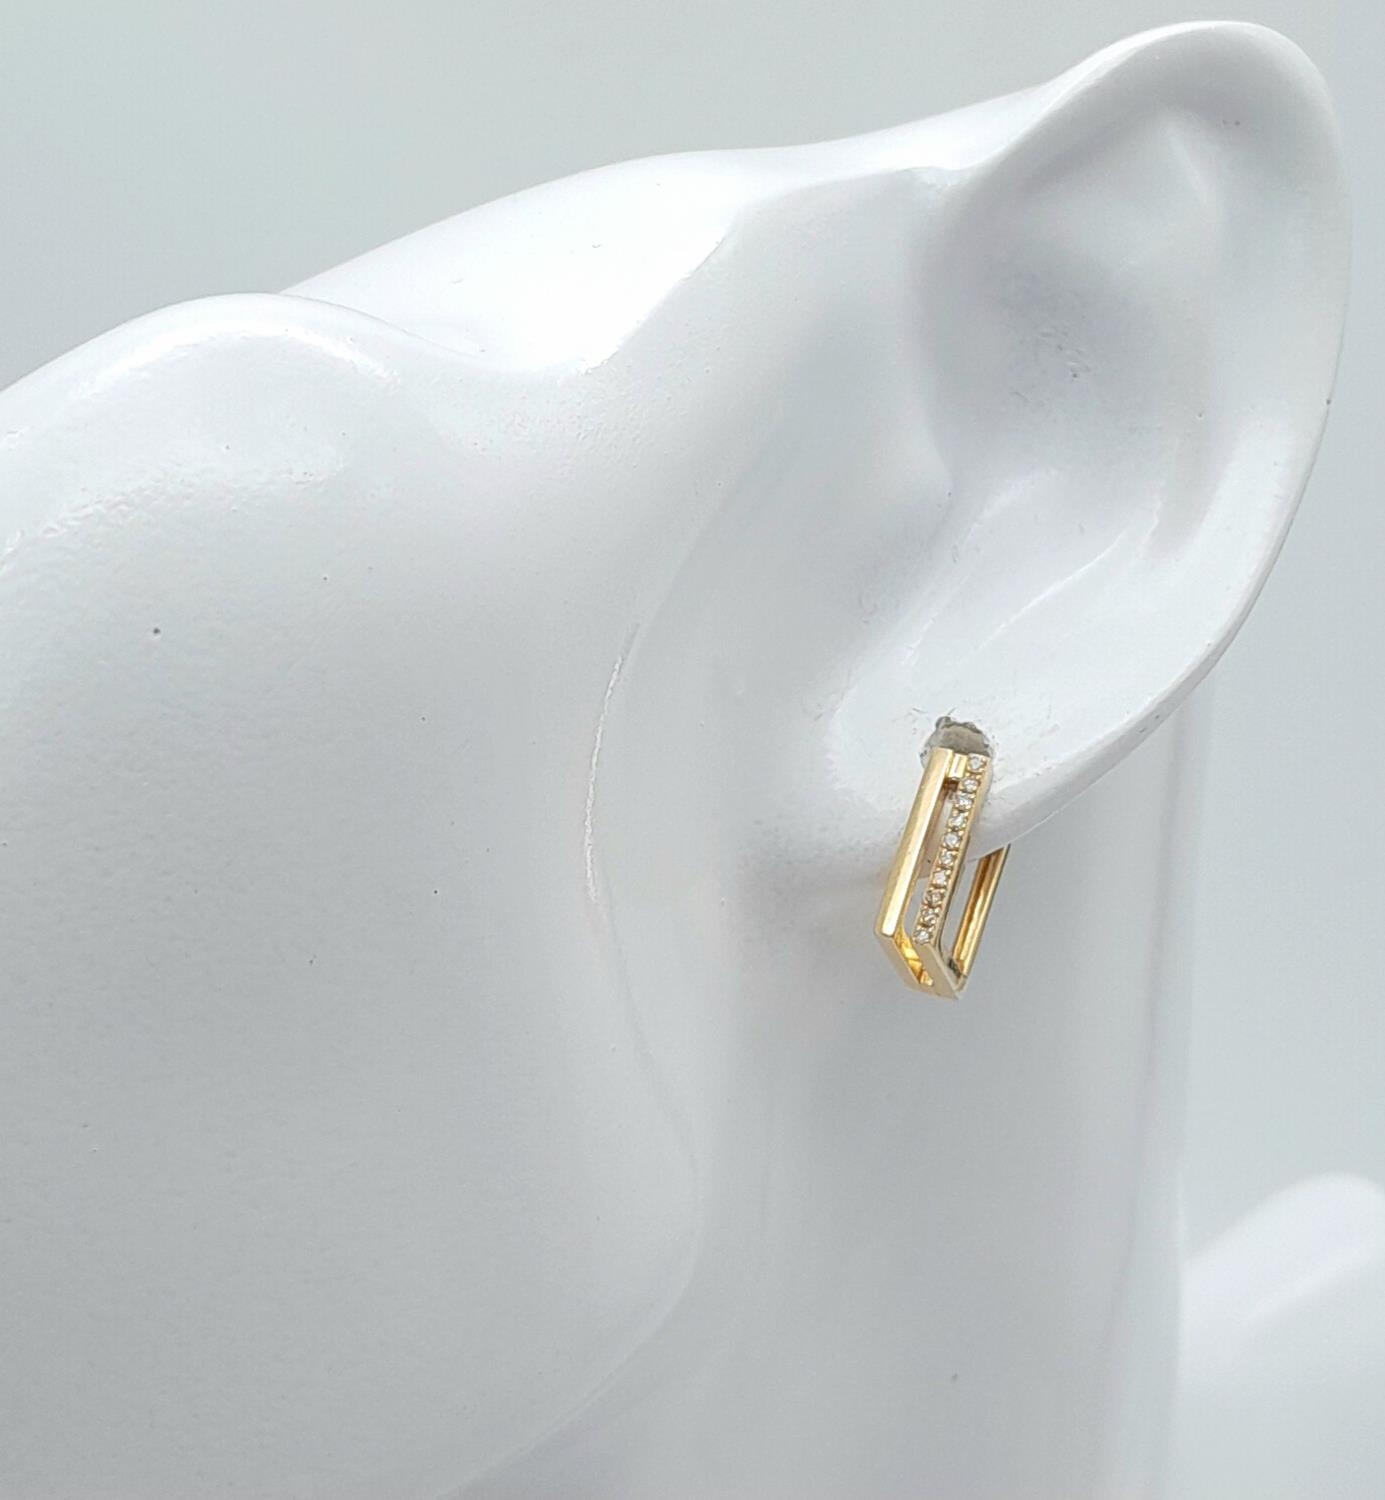 A Pair of 14k Gold and Diamond Massika Designer Rectangular Earrings. 2.2g total weight. - Image 6 of 7